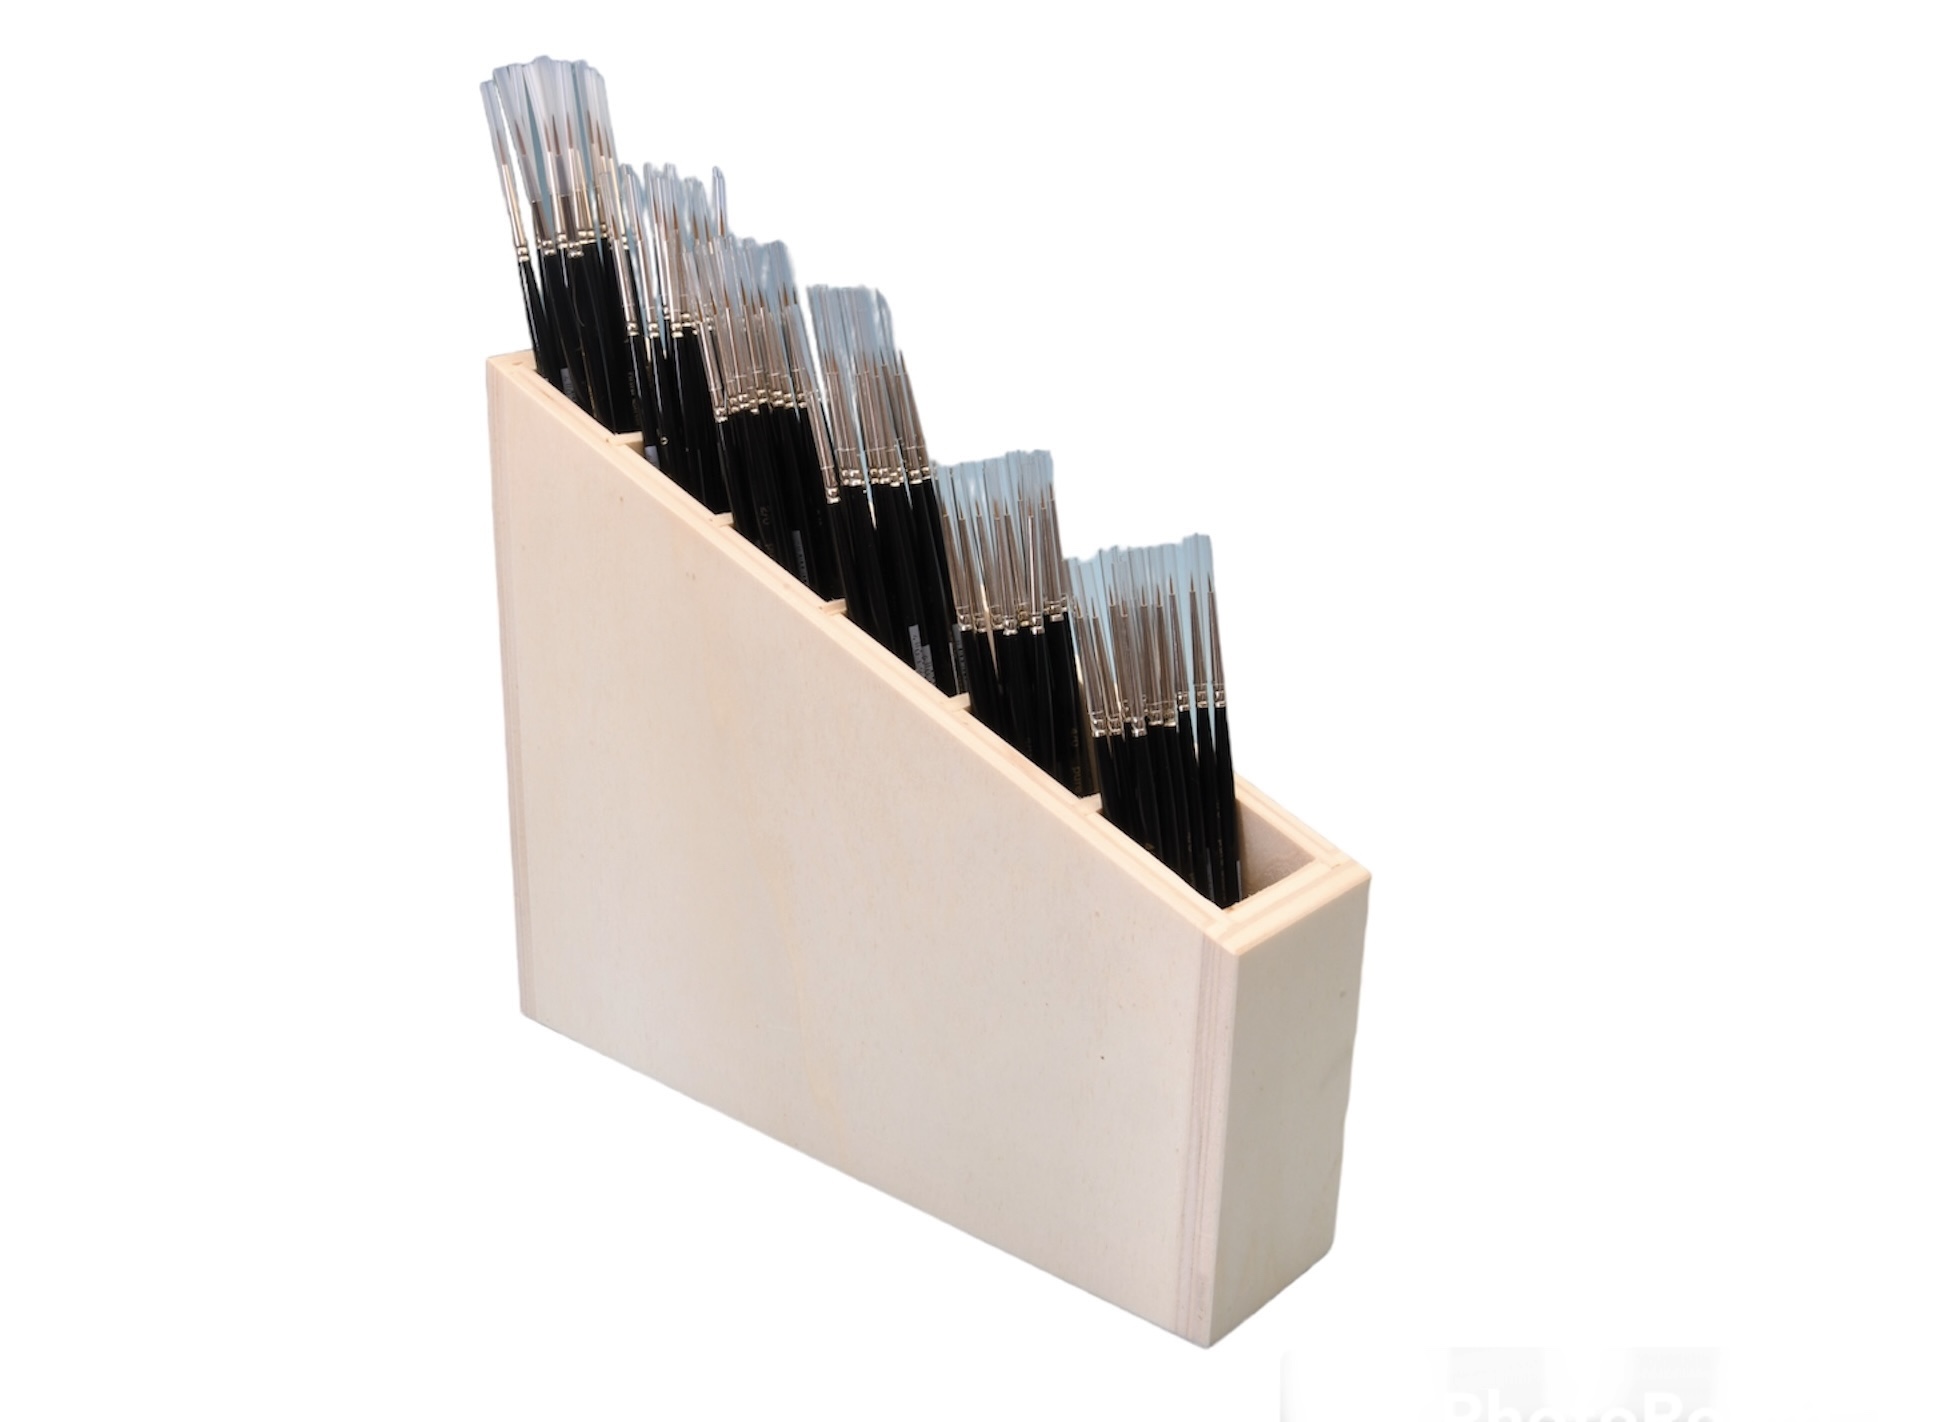 45509 Sable Paint Brushes - Wooden Display with 144 Sable Brushes